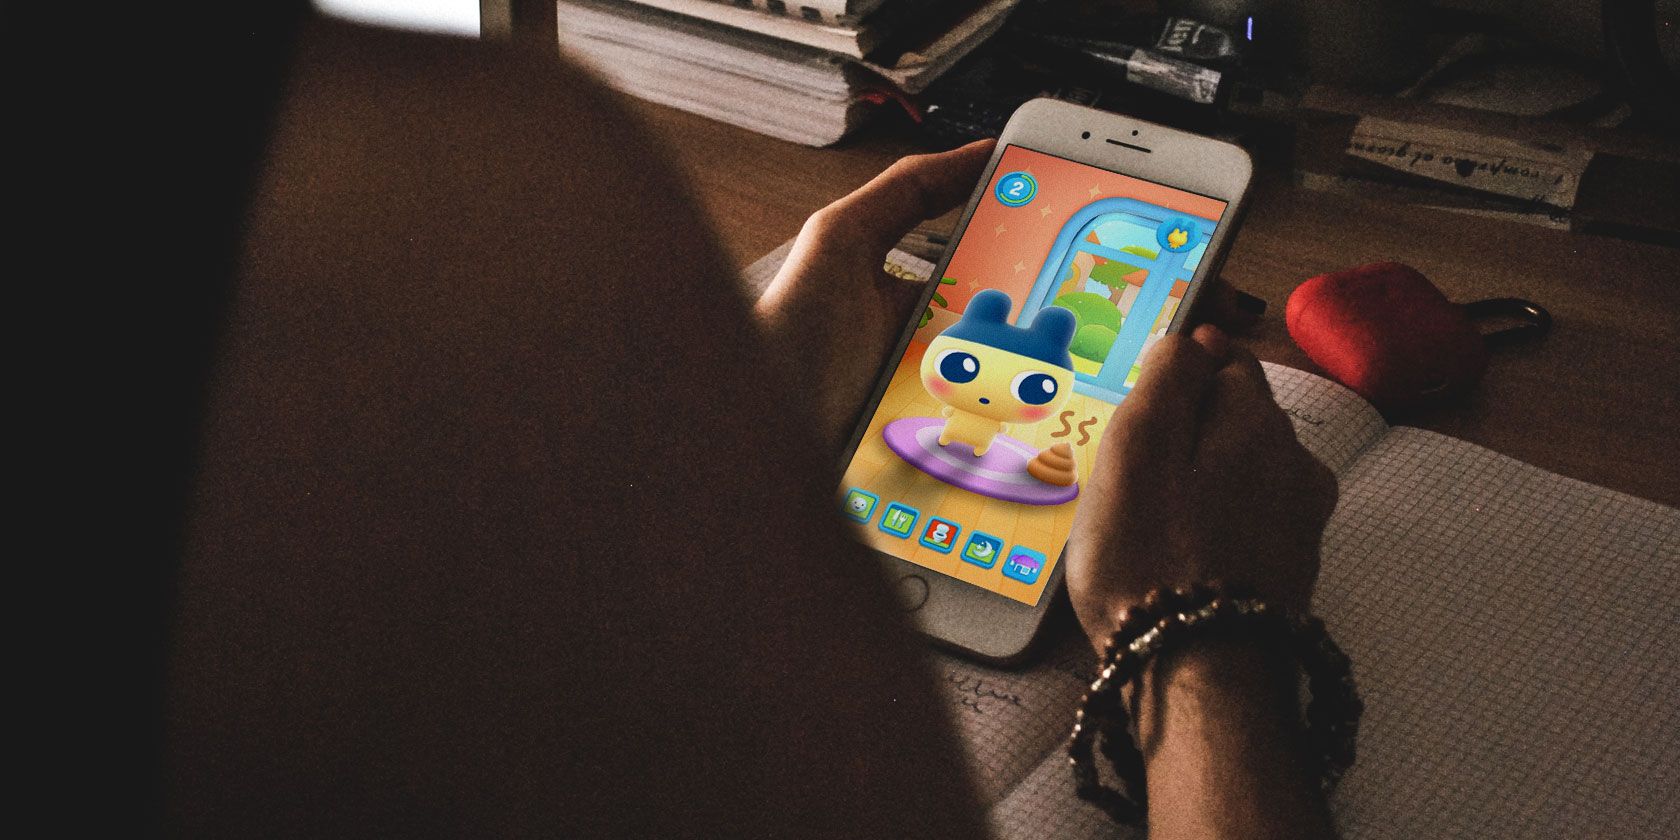 Top 10 Best Virtual Pet Games and Apps for Android & iOS in 2024